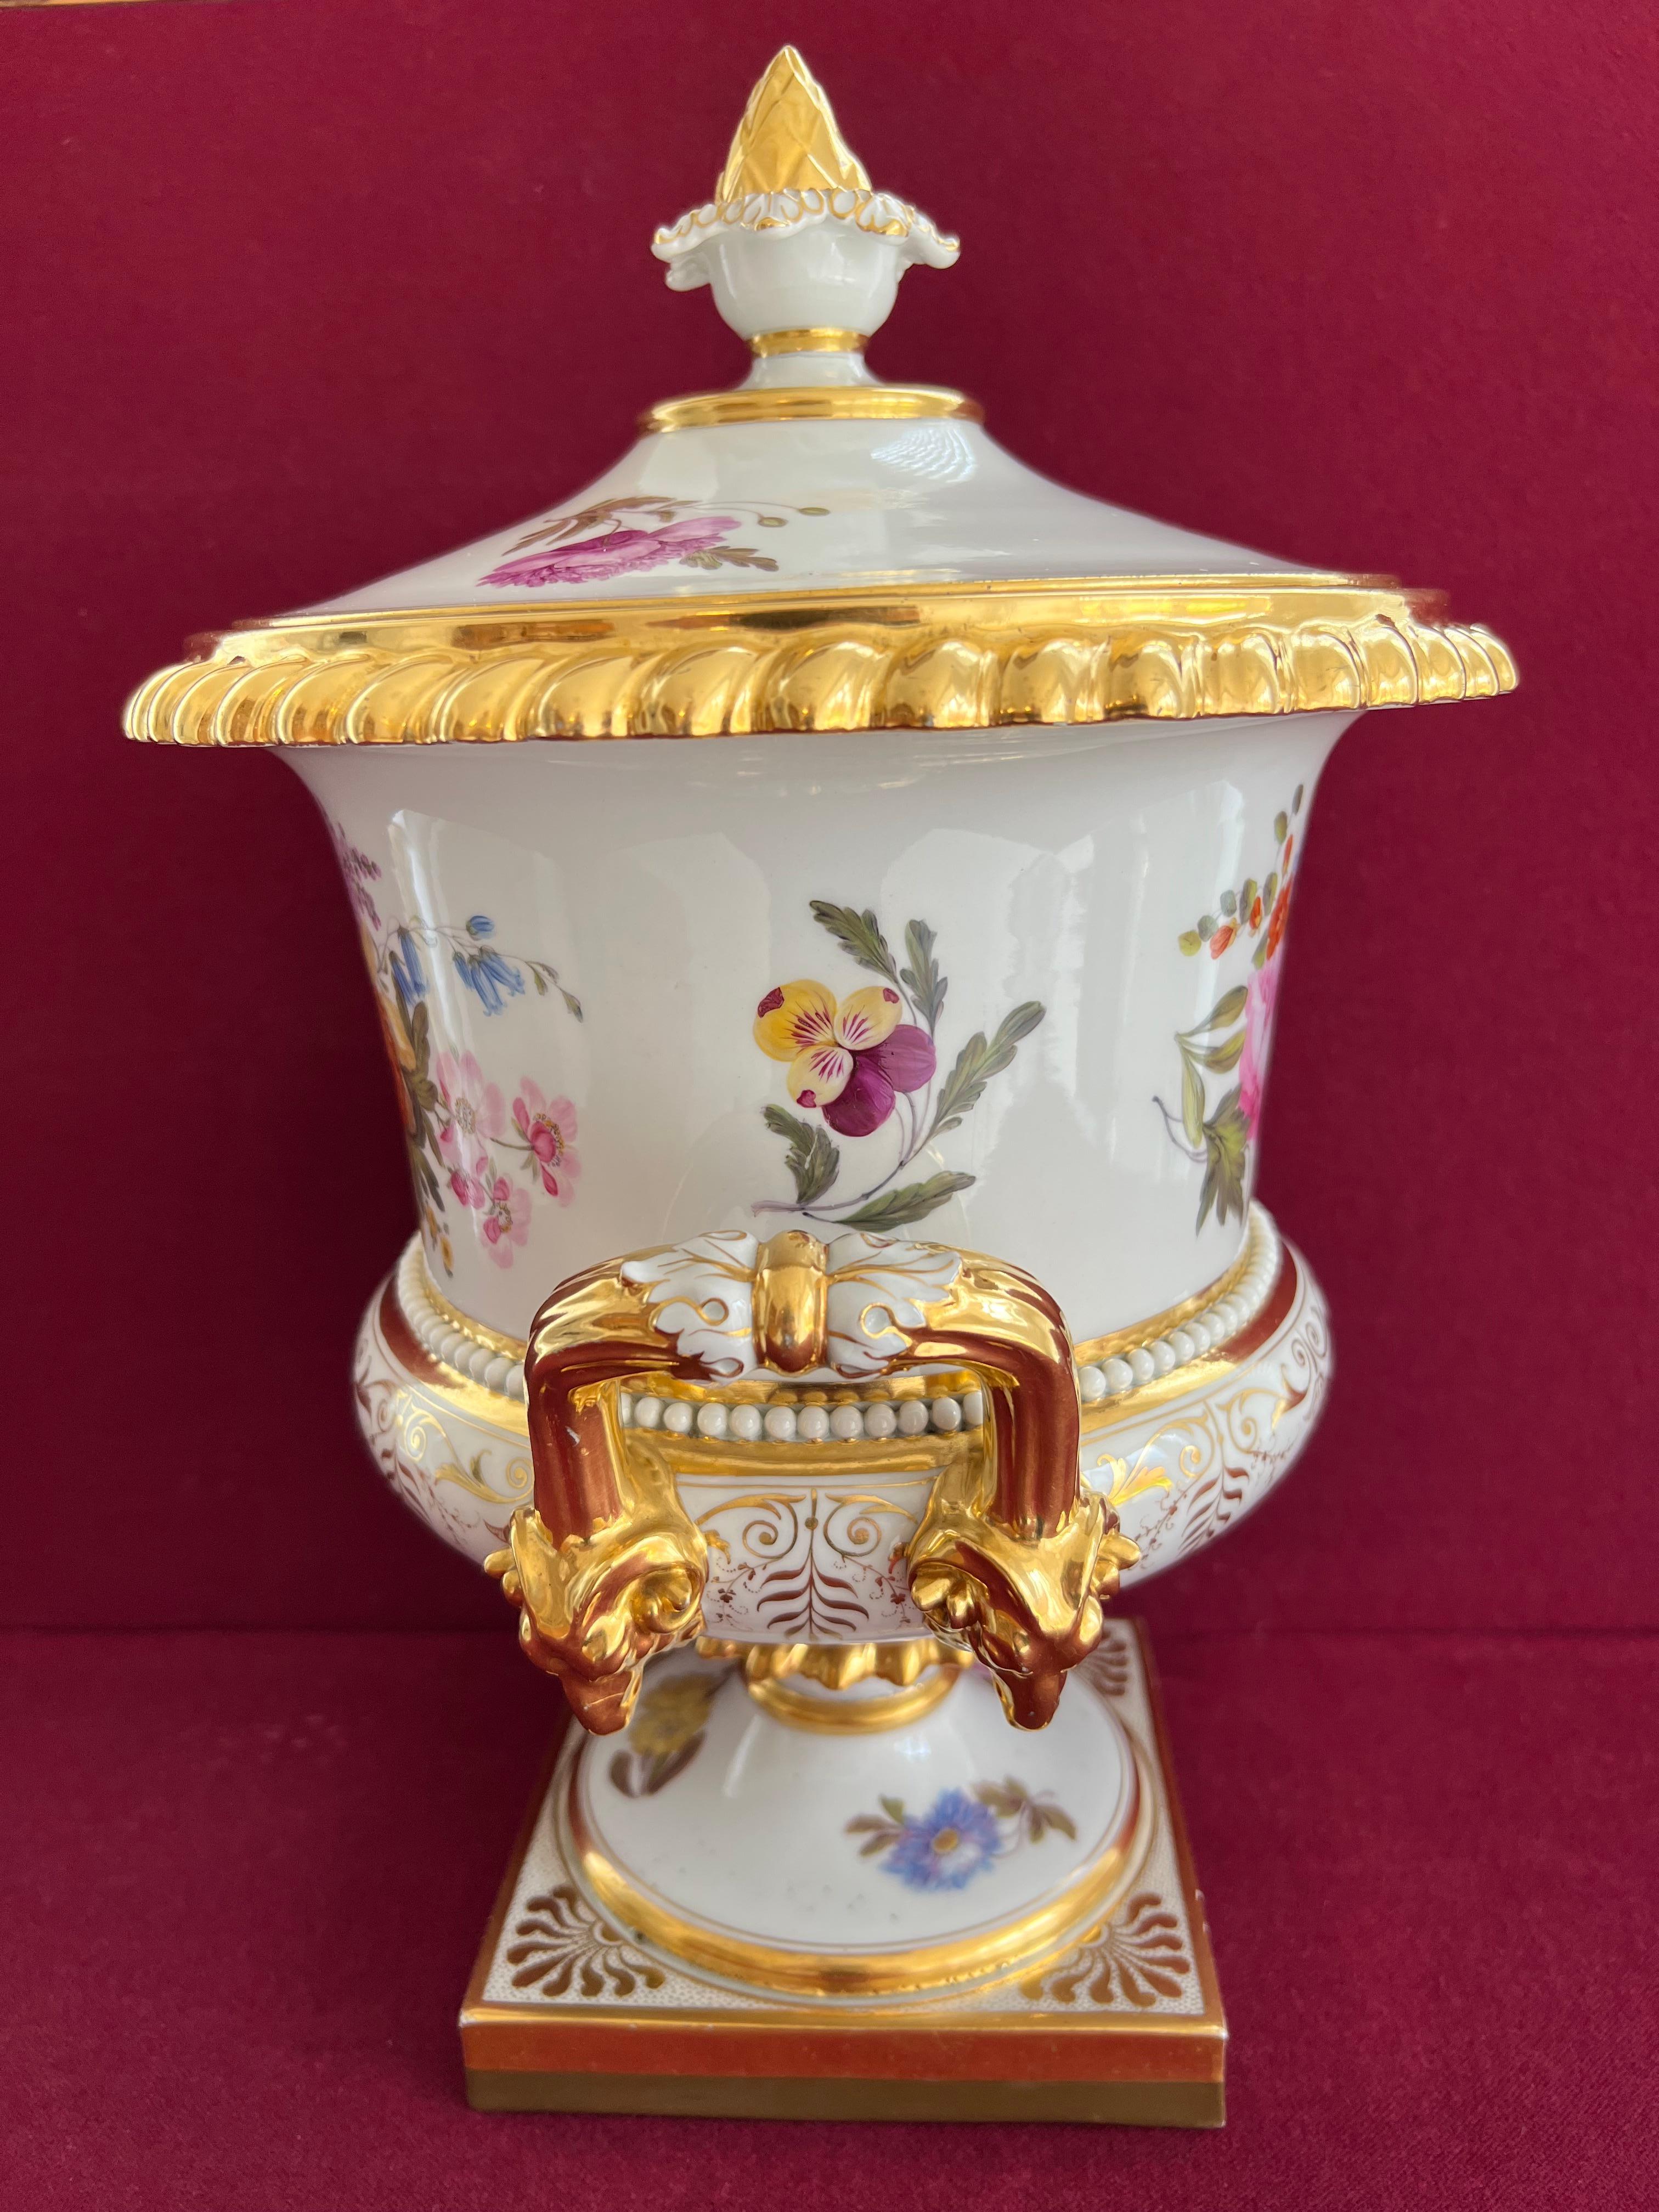 19th Century Magnificent Flight, Barr and Barr Worcester Ice Pail, circa 1820-1830